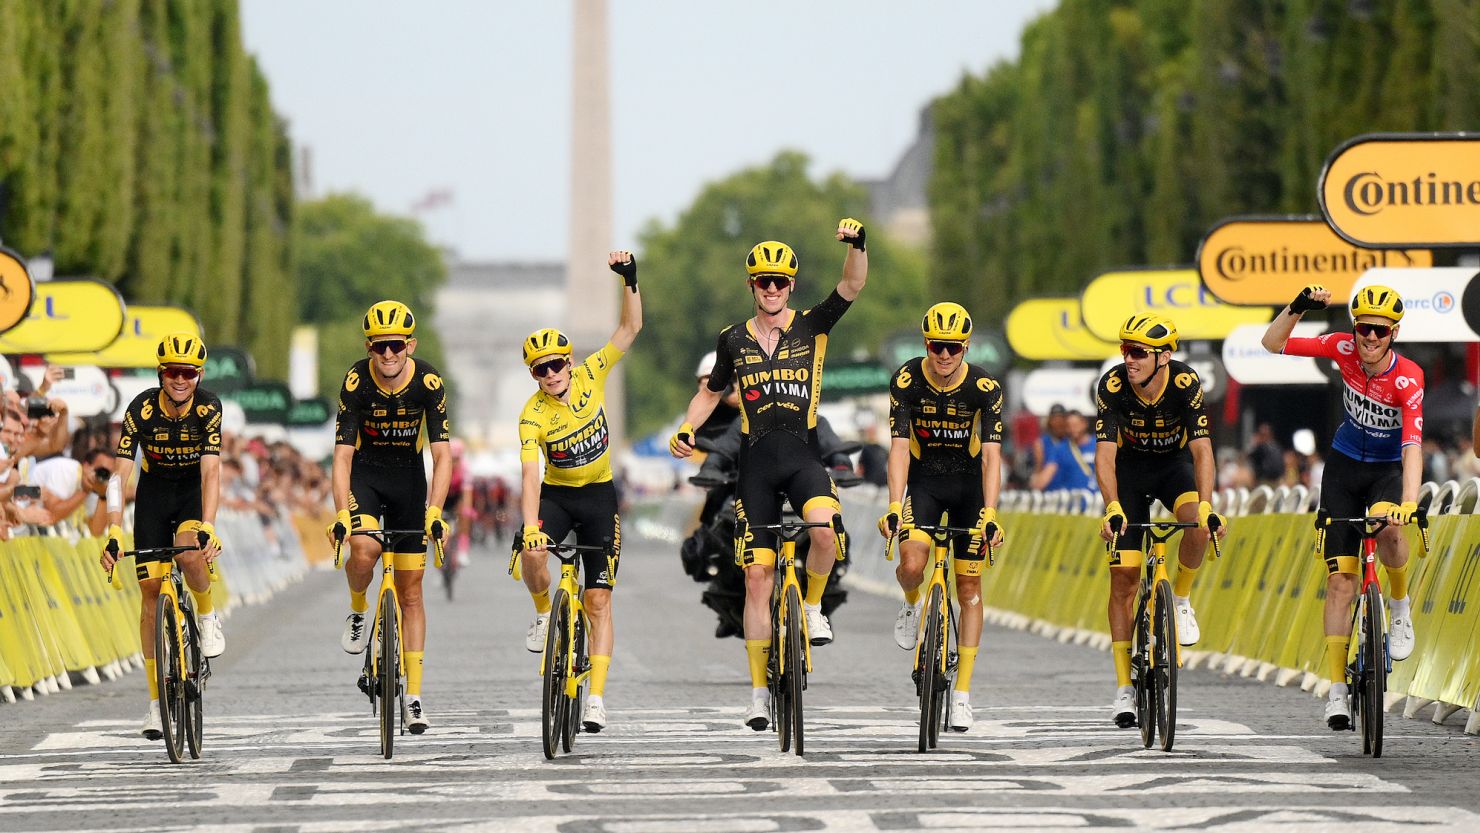 PARIS, FRANCE - JULY 23: Jonas Vingegaard of Denmark - Yellow Leader Jersey, Tiesj Benoot of Belgium, Wilco Kelderman of The Netherlands, Sepp Kuss of The United States, Christophe Laporte of France, Dylan Van Baarle of The Netherlands, Nathan Van Hooydonck of Belgium and Team Jumbo-Visma celebrate after the stage twenty-one of the 110th Tour de France 2023 a 11 5.1km stage from Saint-Quentin-en-Yvelines to Paris / #UCIWT / on July 23, 2023 in Paris, France. (Photo by David Ramos/Getty Images)